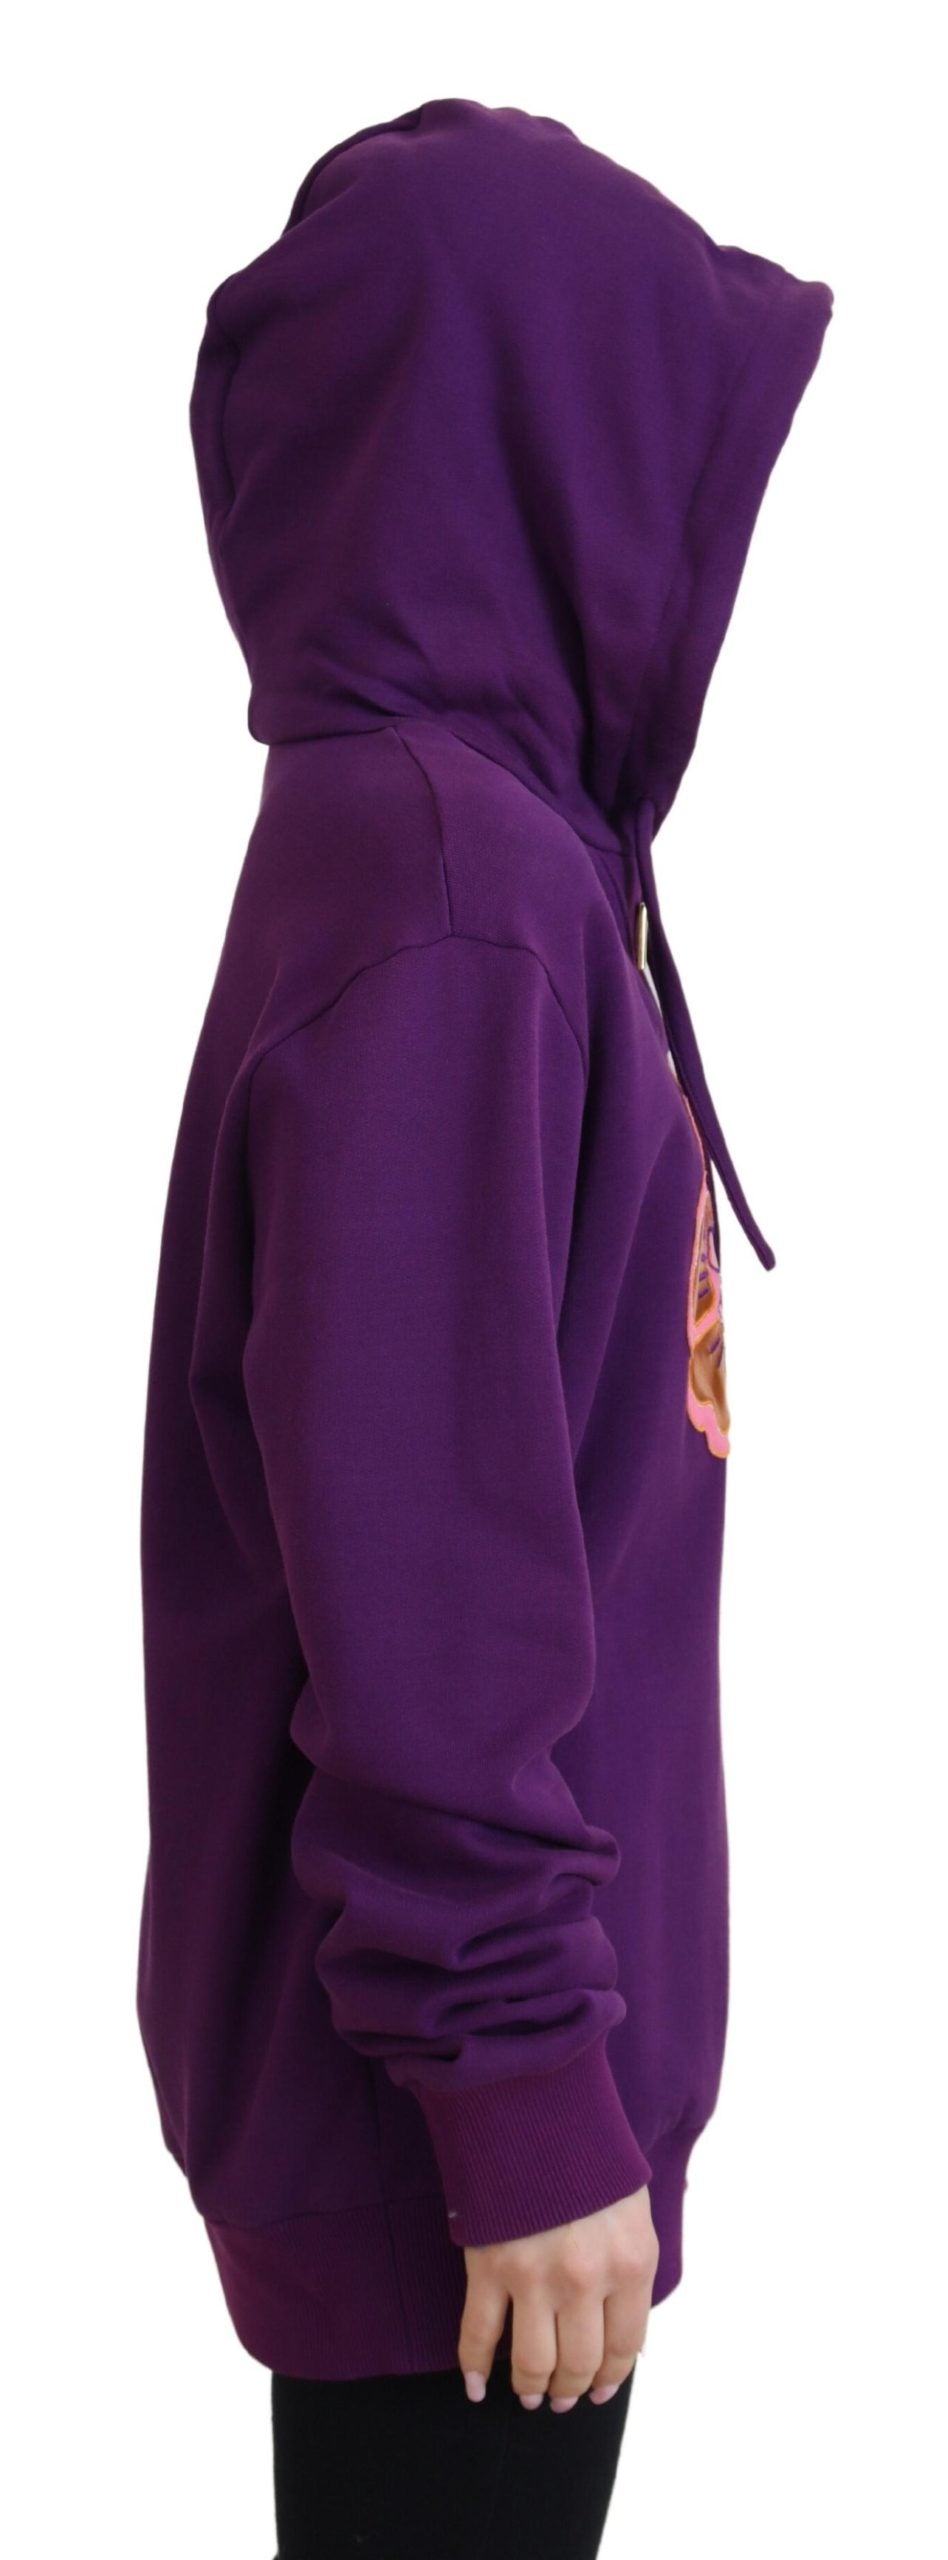 Elegant Floral Hooded Pullover Sweater in Purple